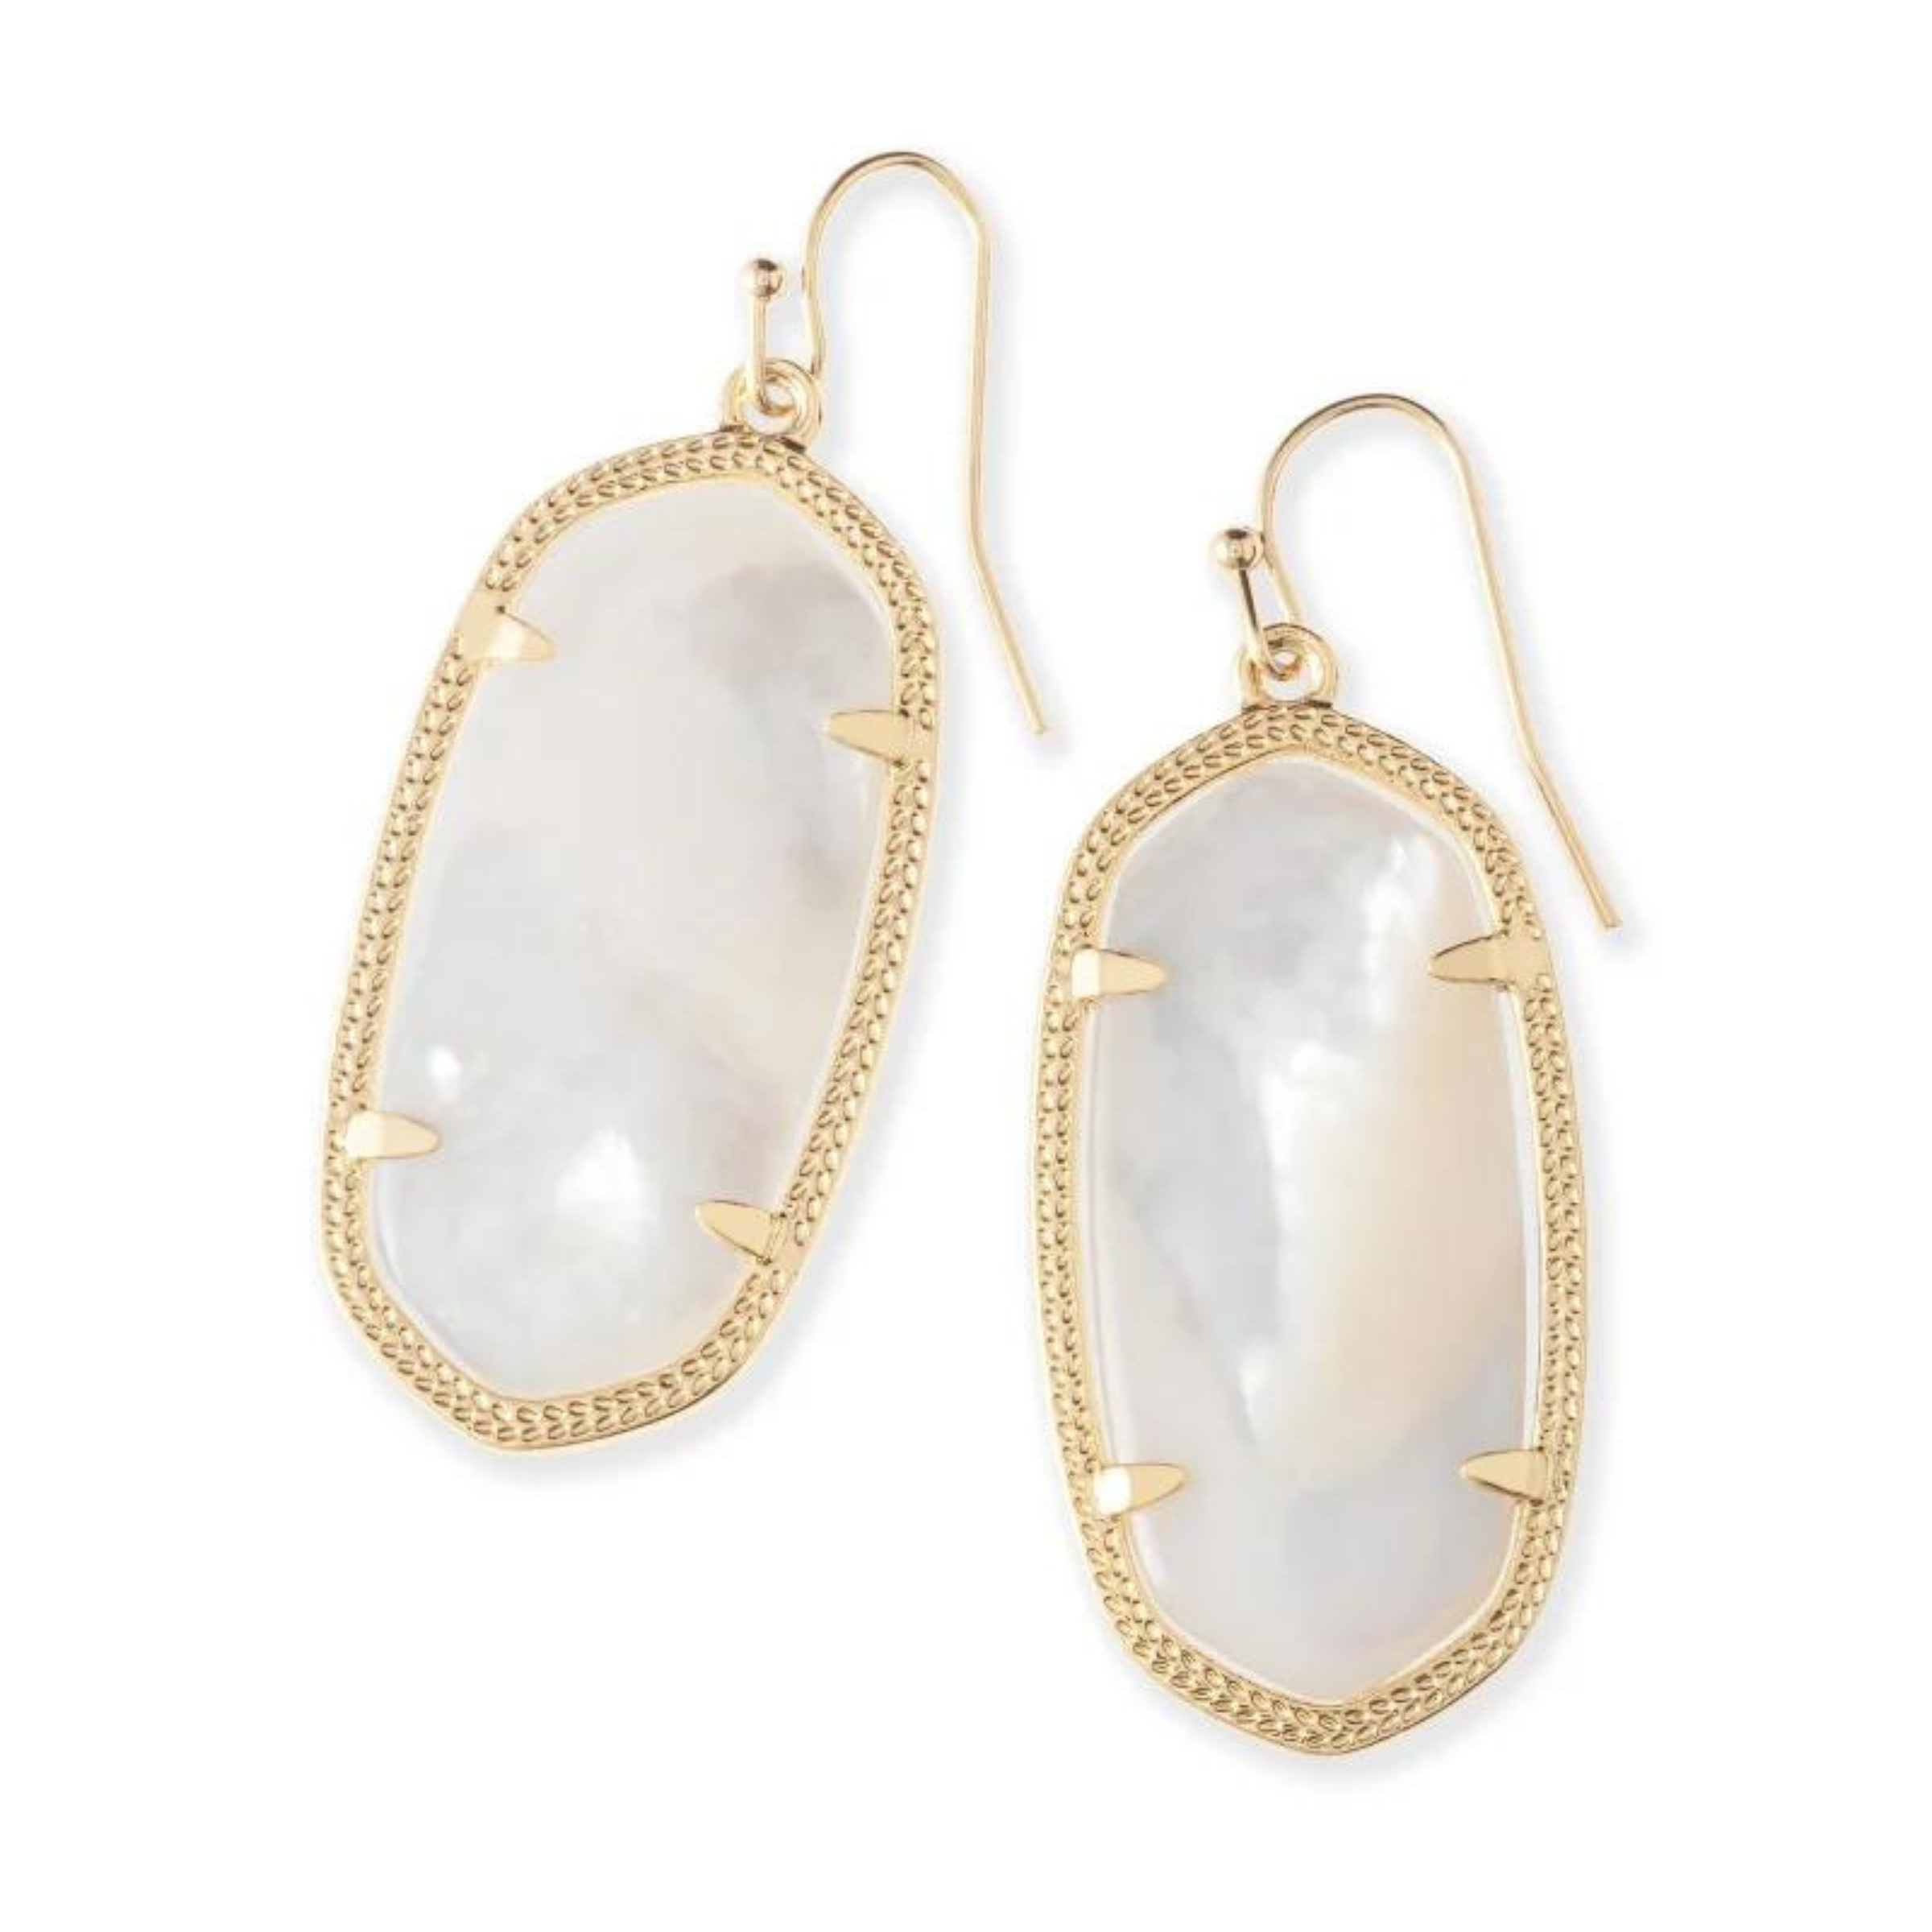 Gold drop dangle earrings with ivory pearl stone centers pictured on a white background.